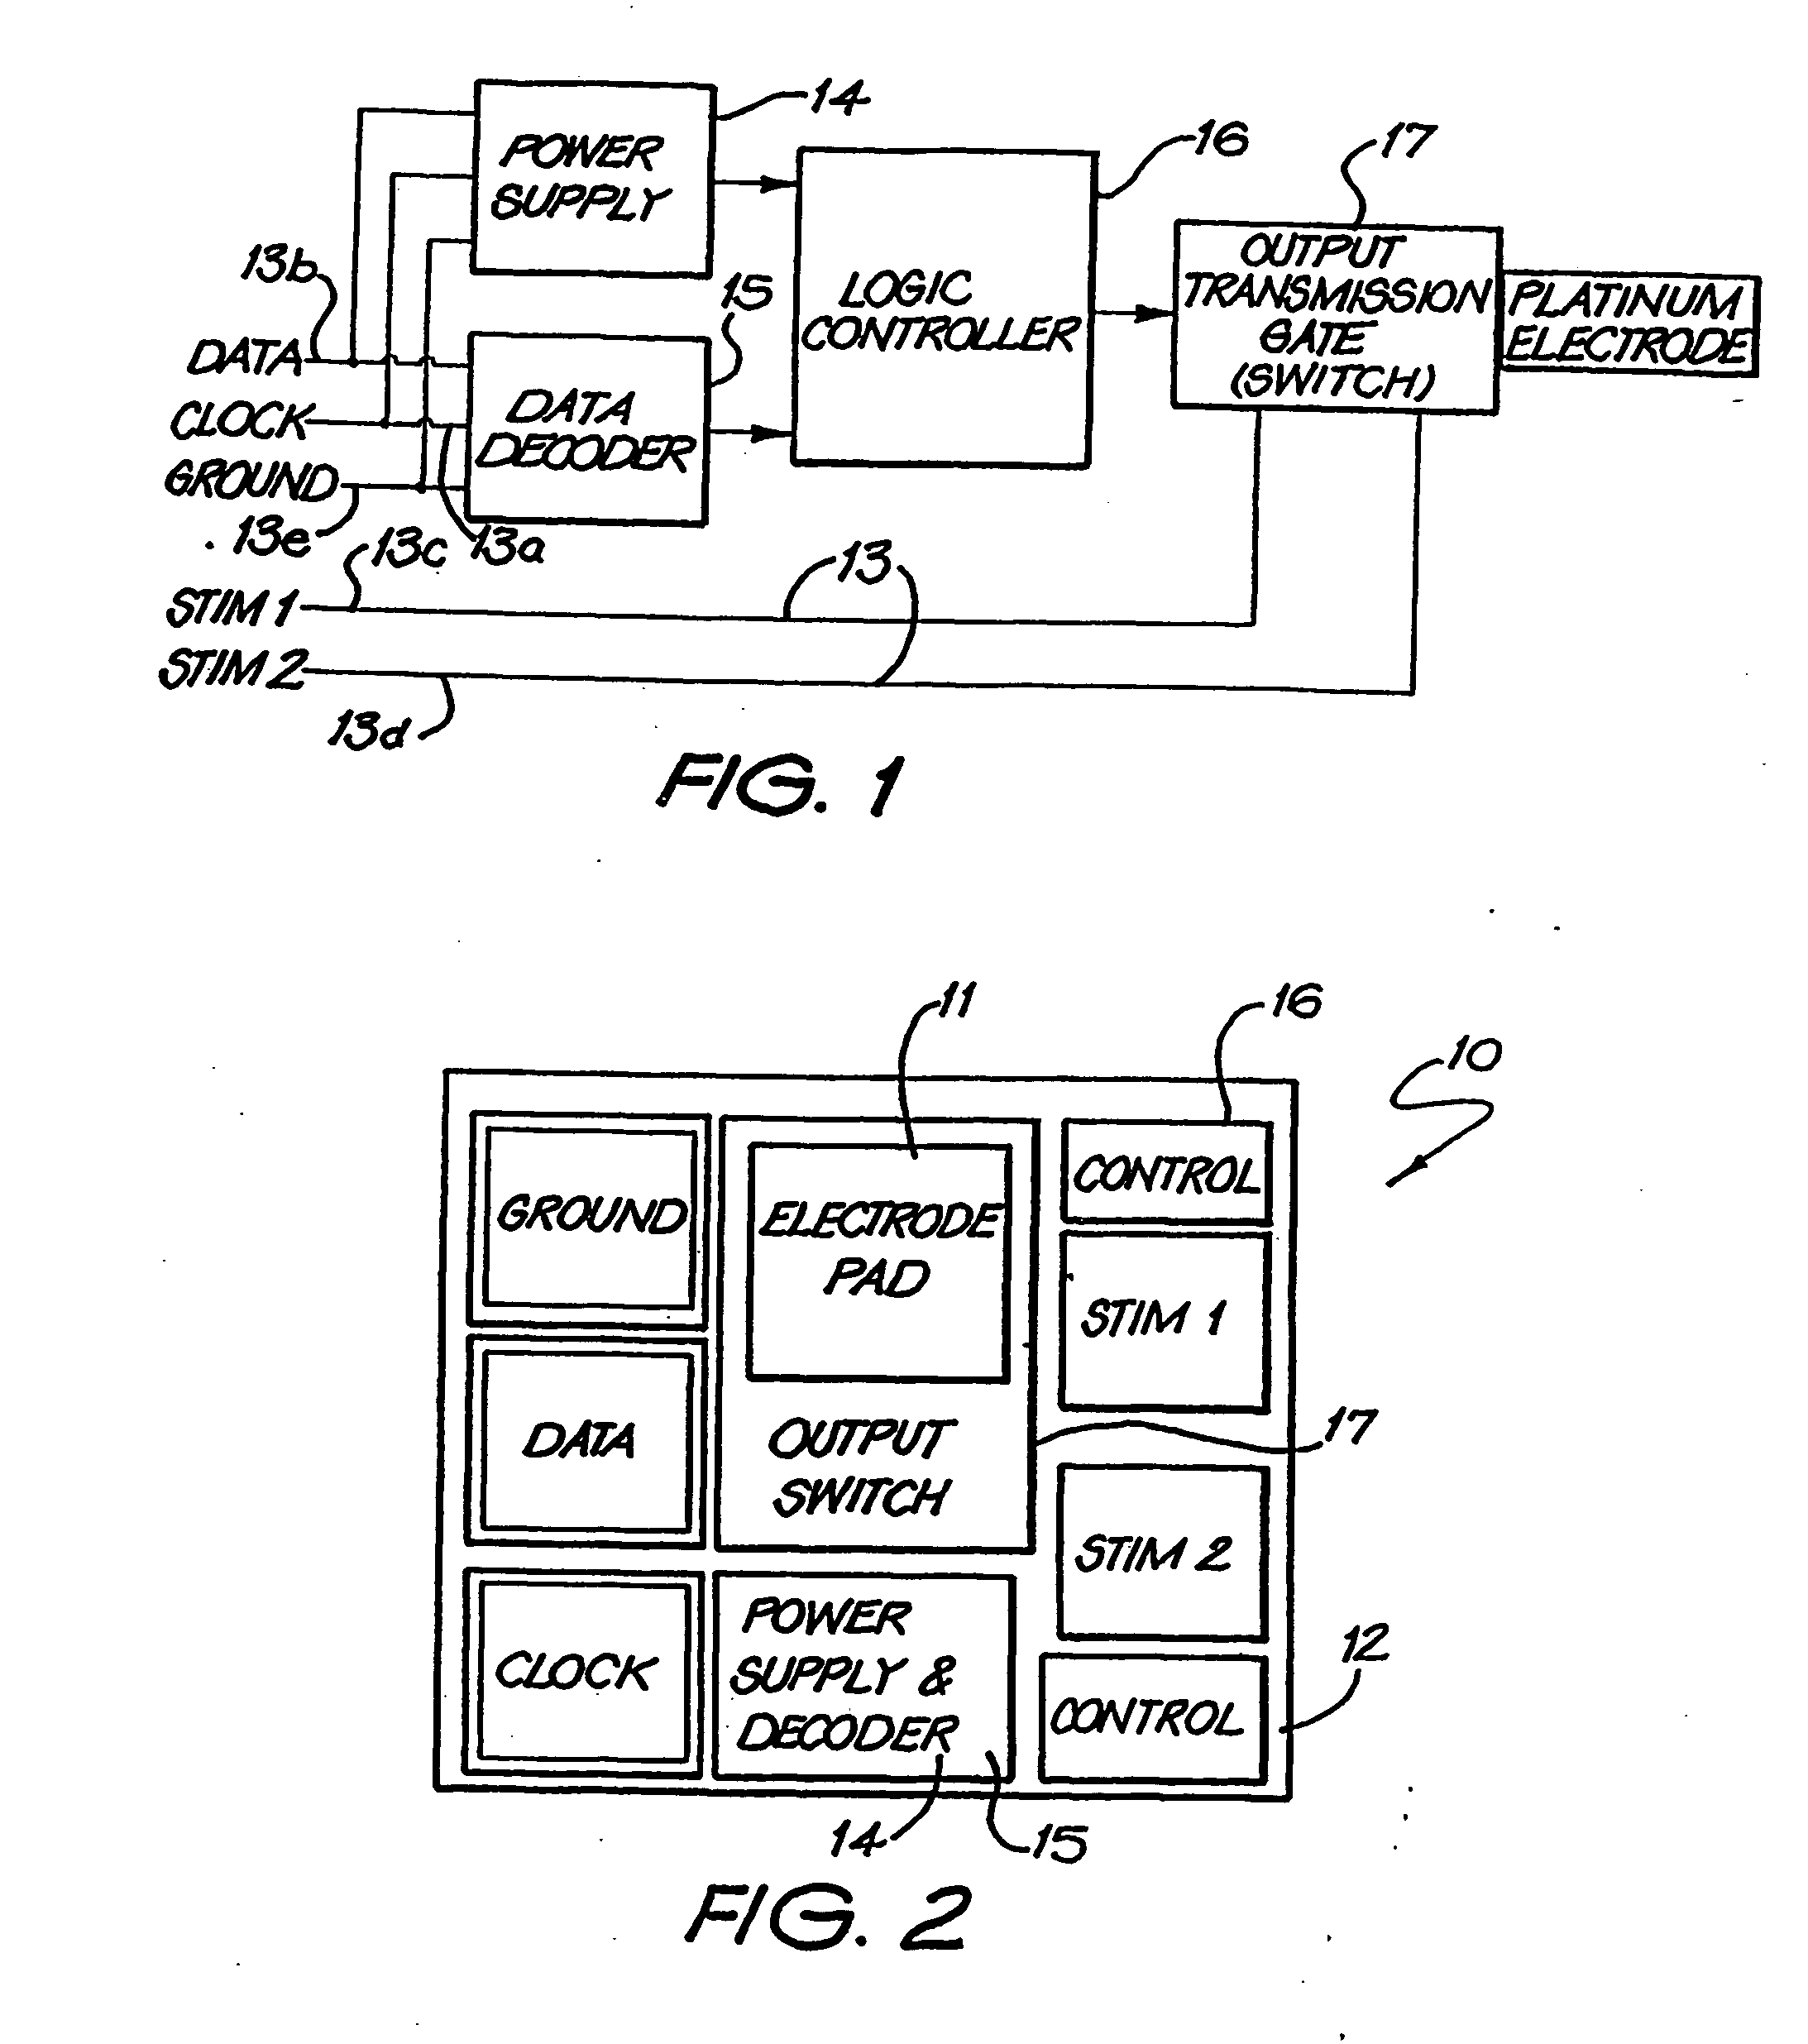 Multi-electrode cochlear implant system with distributed electronics